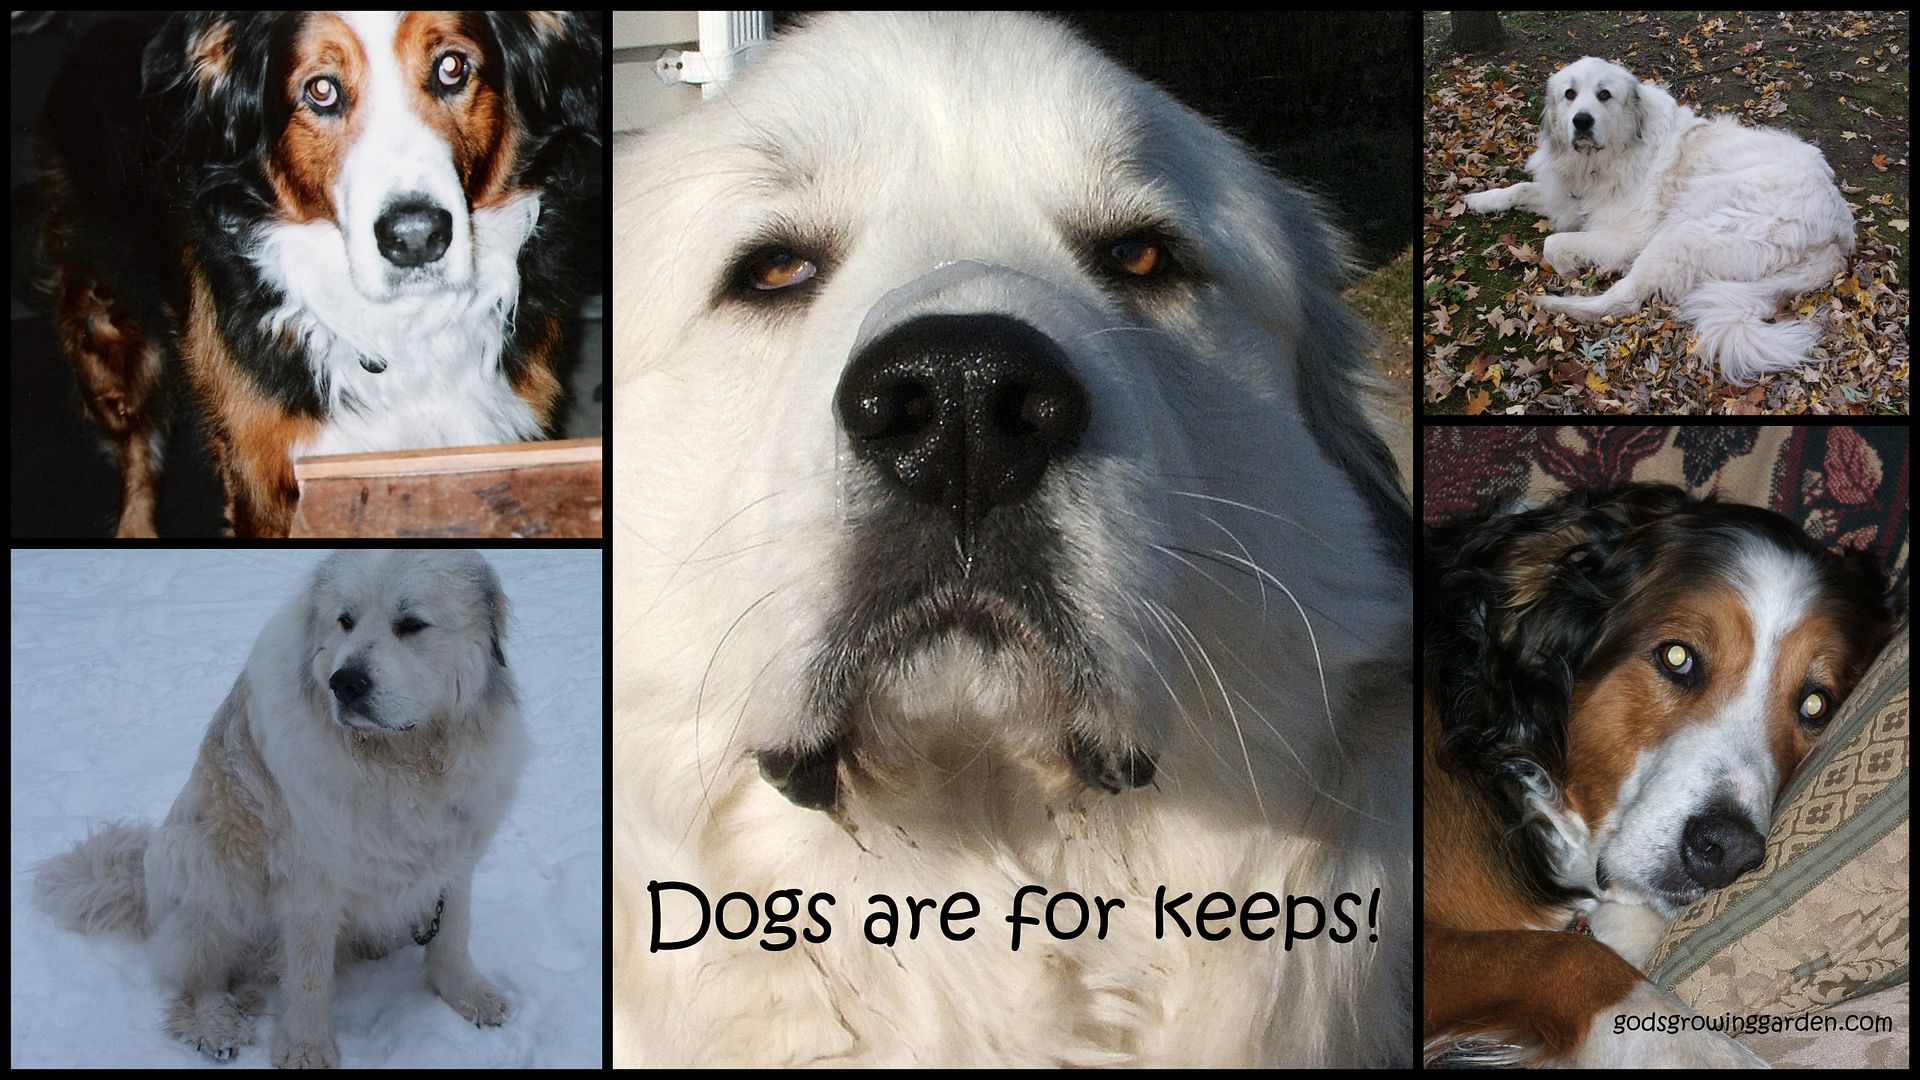 Dogs are for keeps by Angie Ouellette-Tower for godsgrowinggardencom/ photo 2009AnimalKids_zps70fade41.jpg